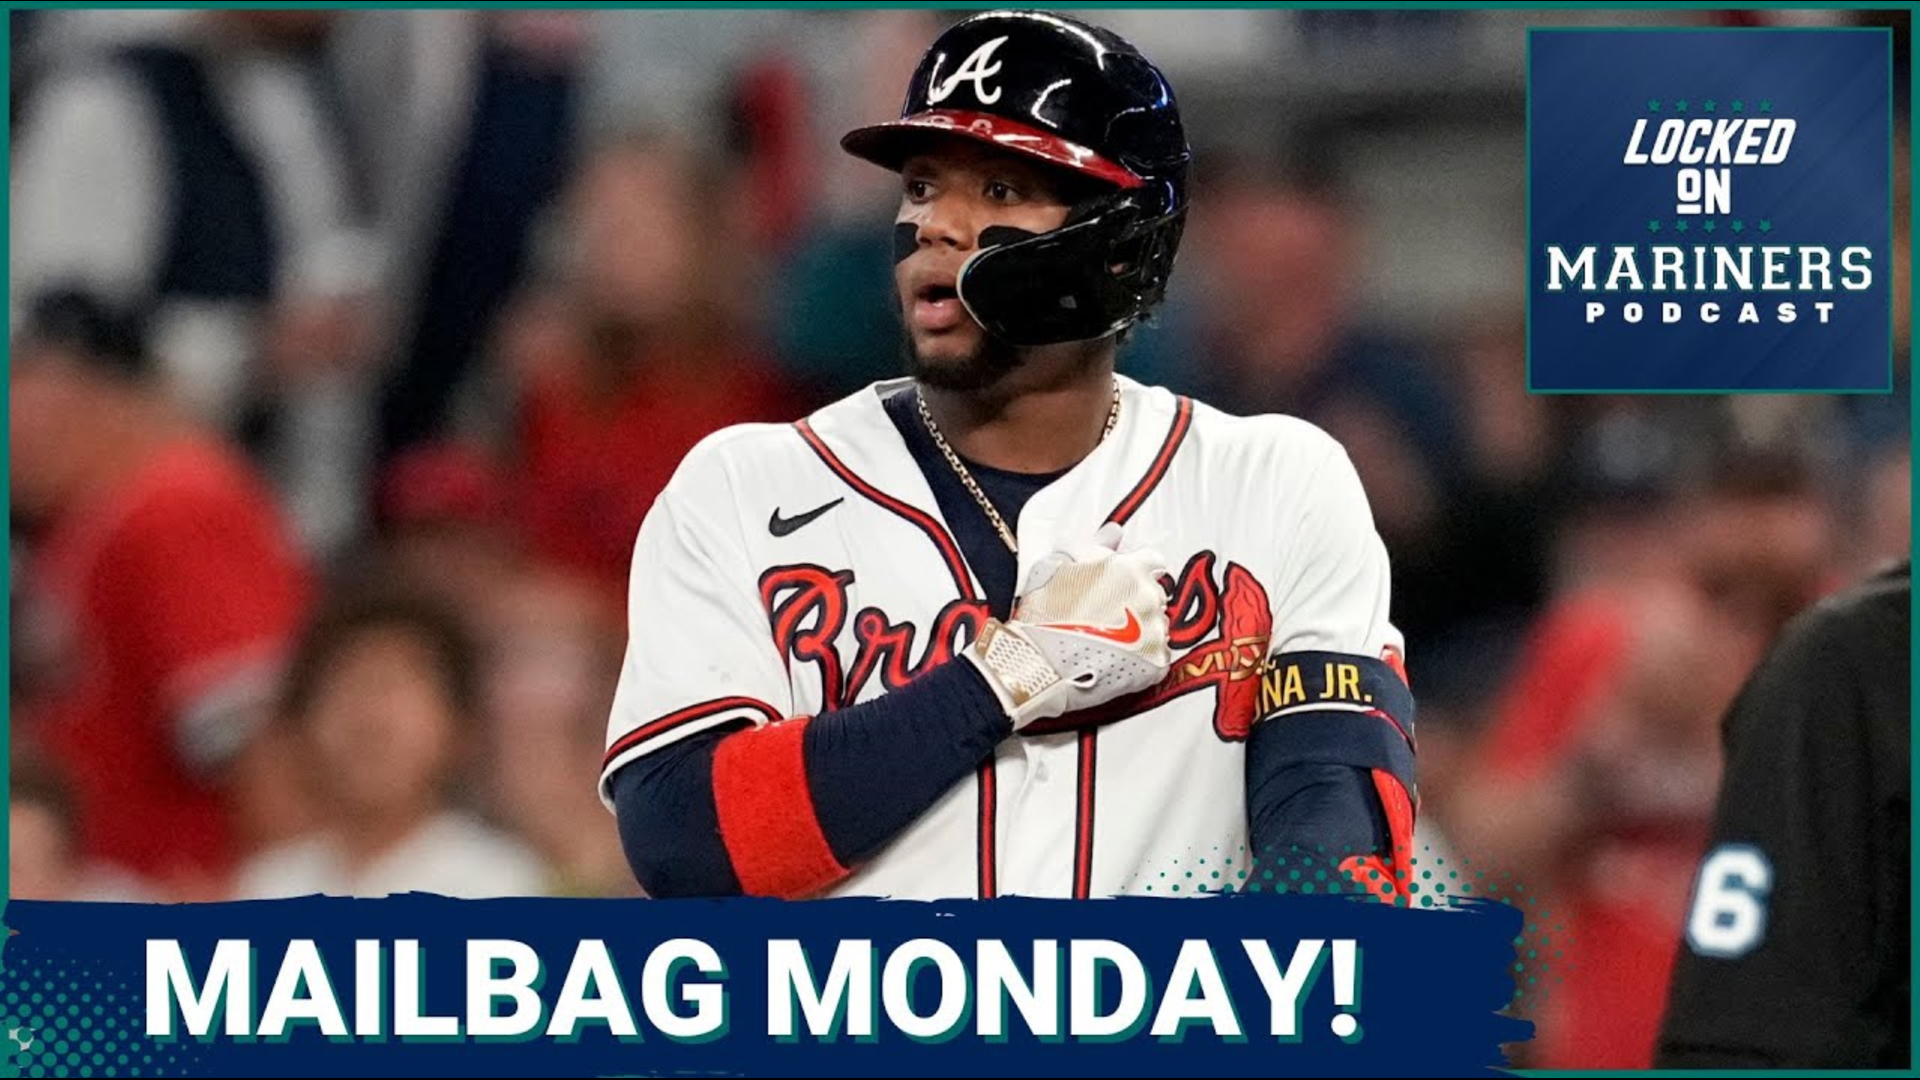 It's time for Mariners Mailbag Monday! Topics range from Ronald Acuna Jr. to new uniforms, from Chris Flexen trade destinations to who plays right field.